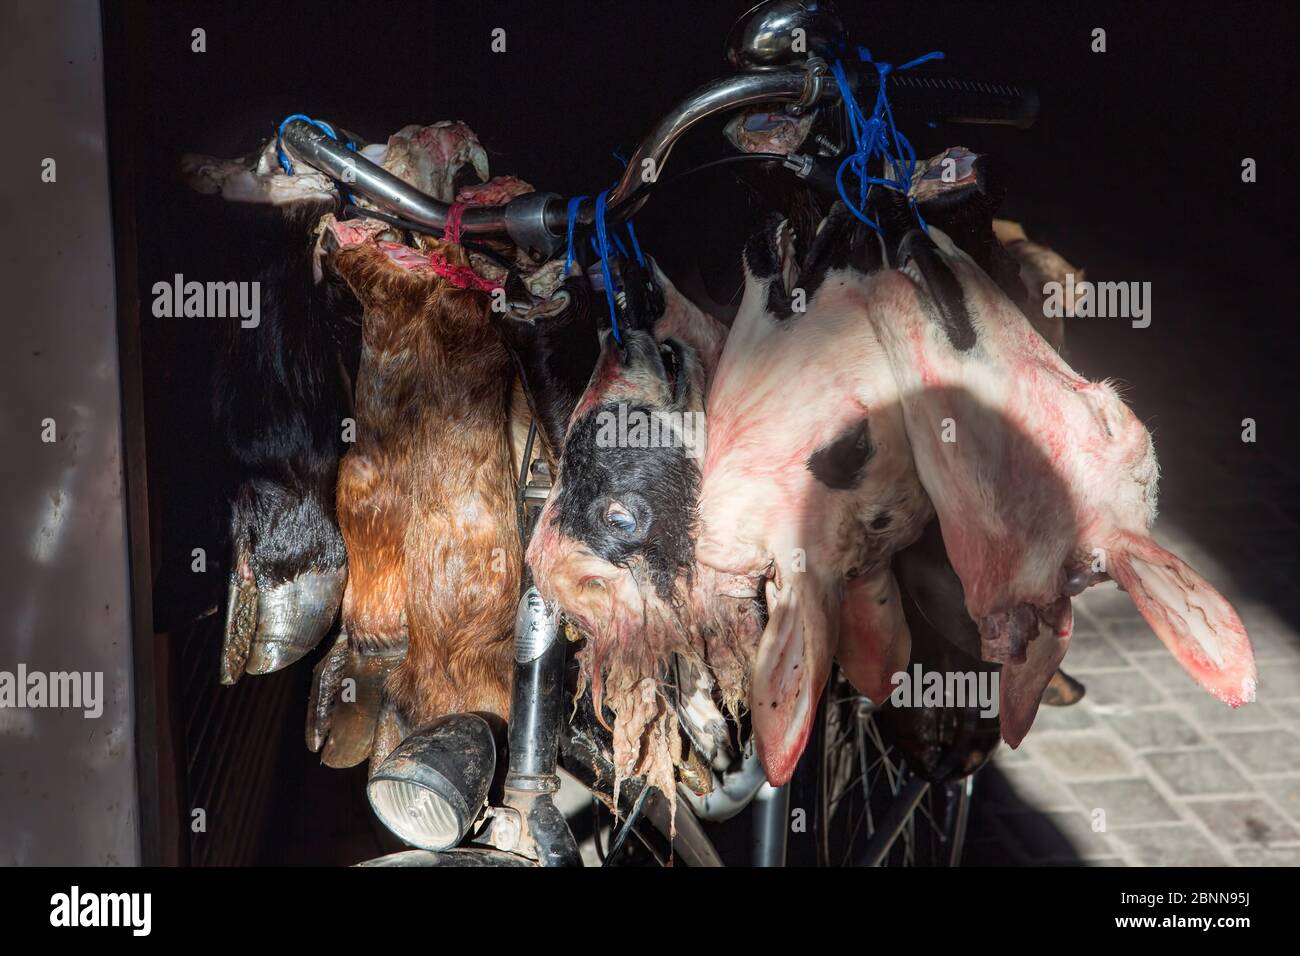 Pieces of cow meat hang on the bicycle, Morocco Stock Photo